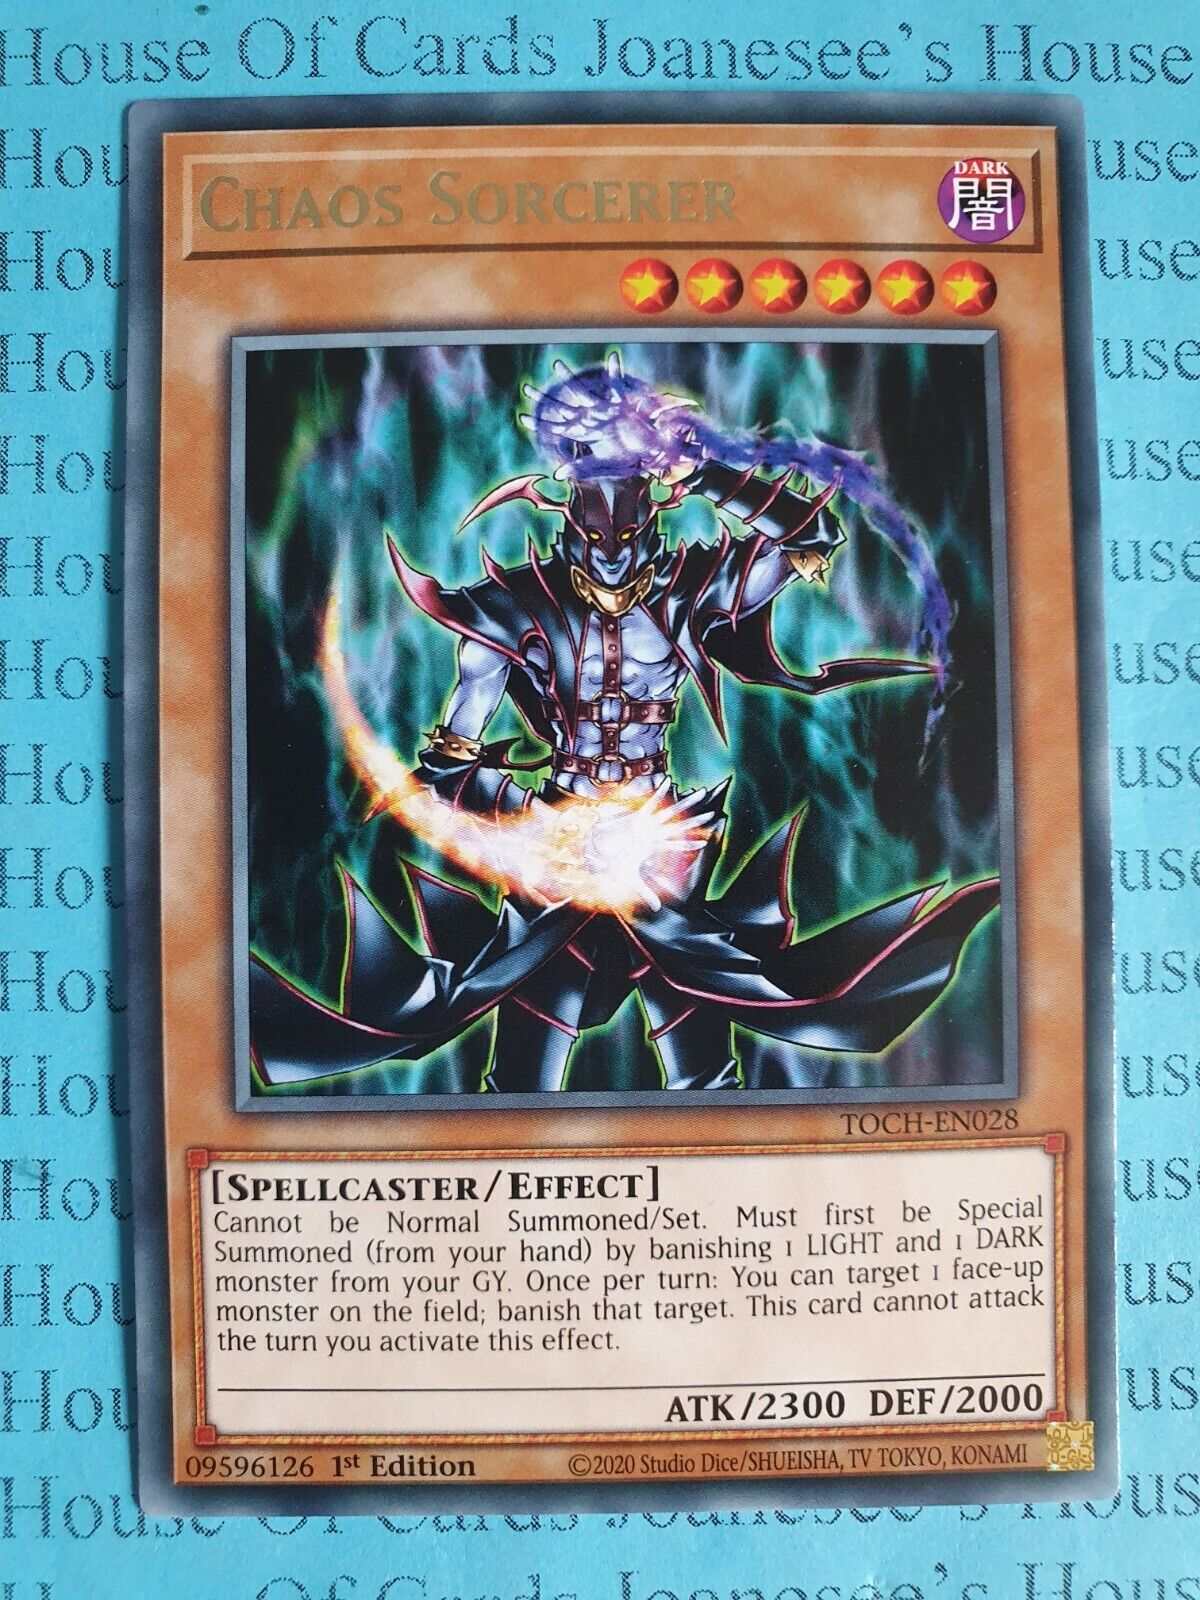 Chaos Sorcerer TOCH-EN028 Rare Yu-Gi-Oh Card 1st Edition New